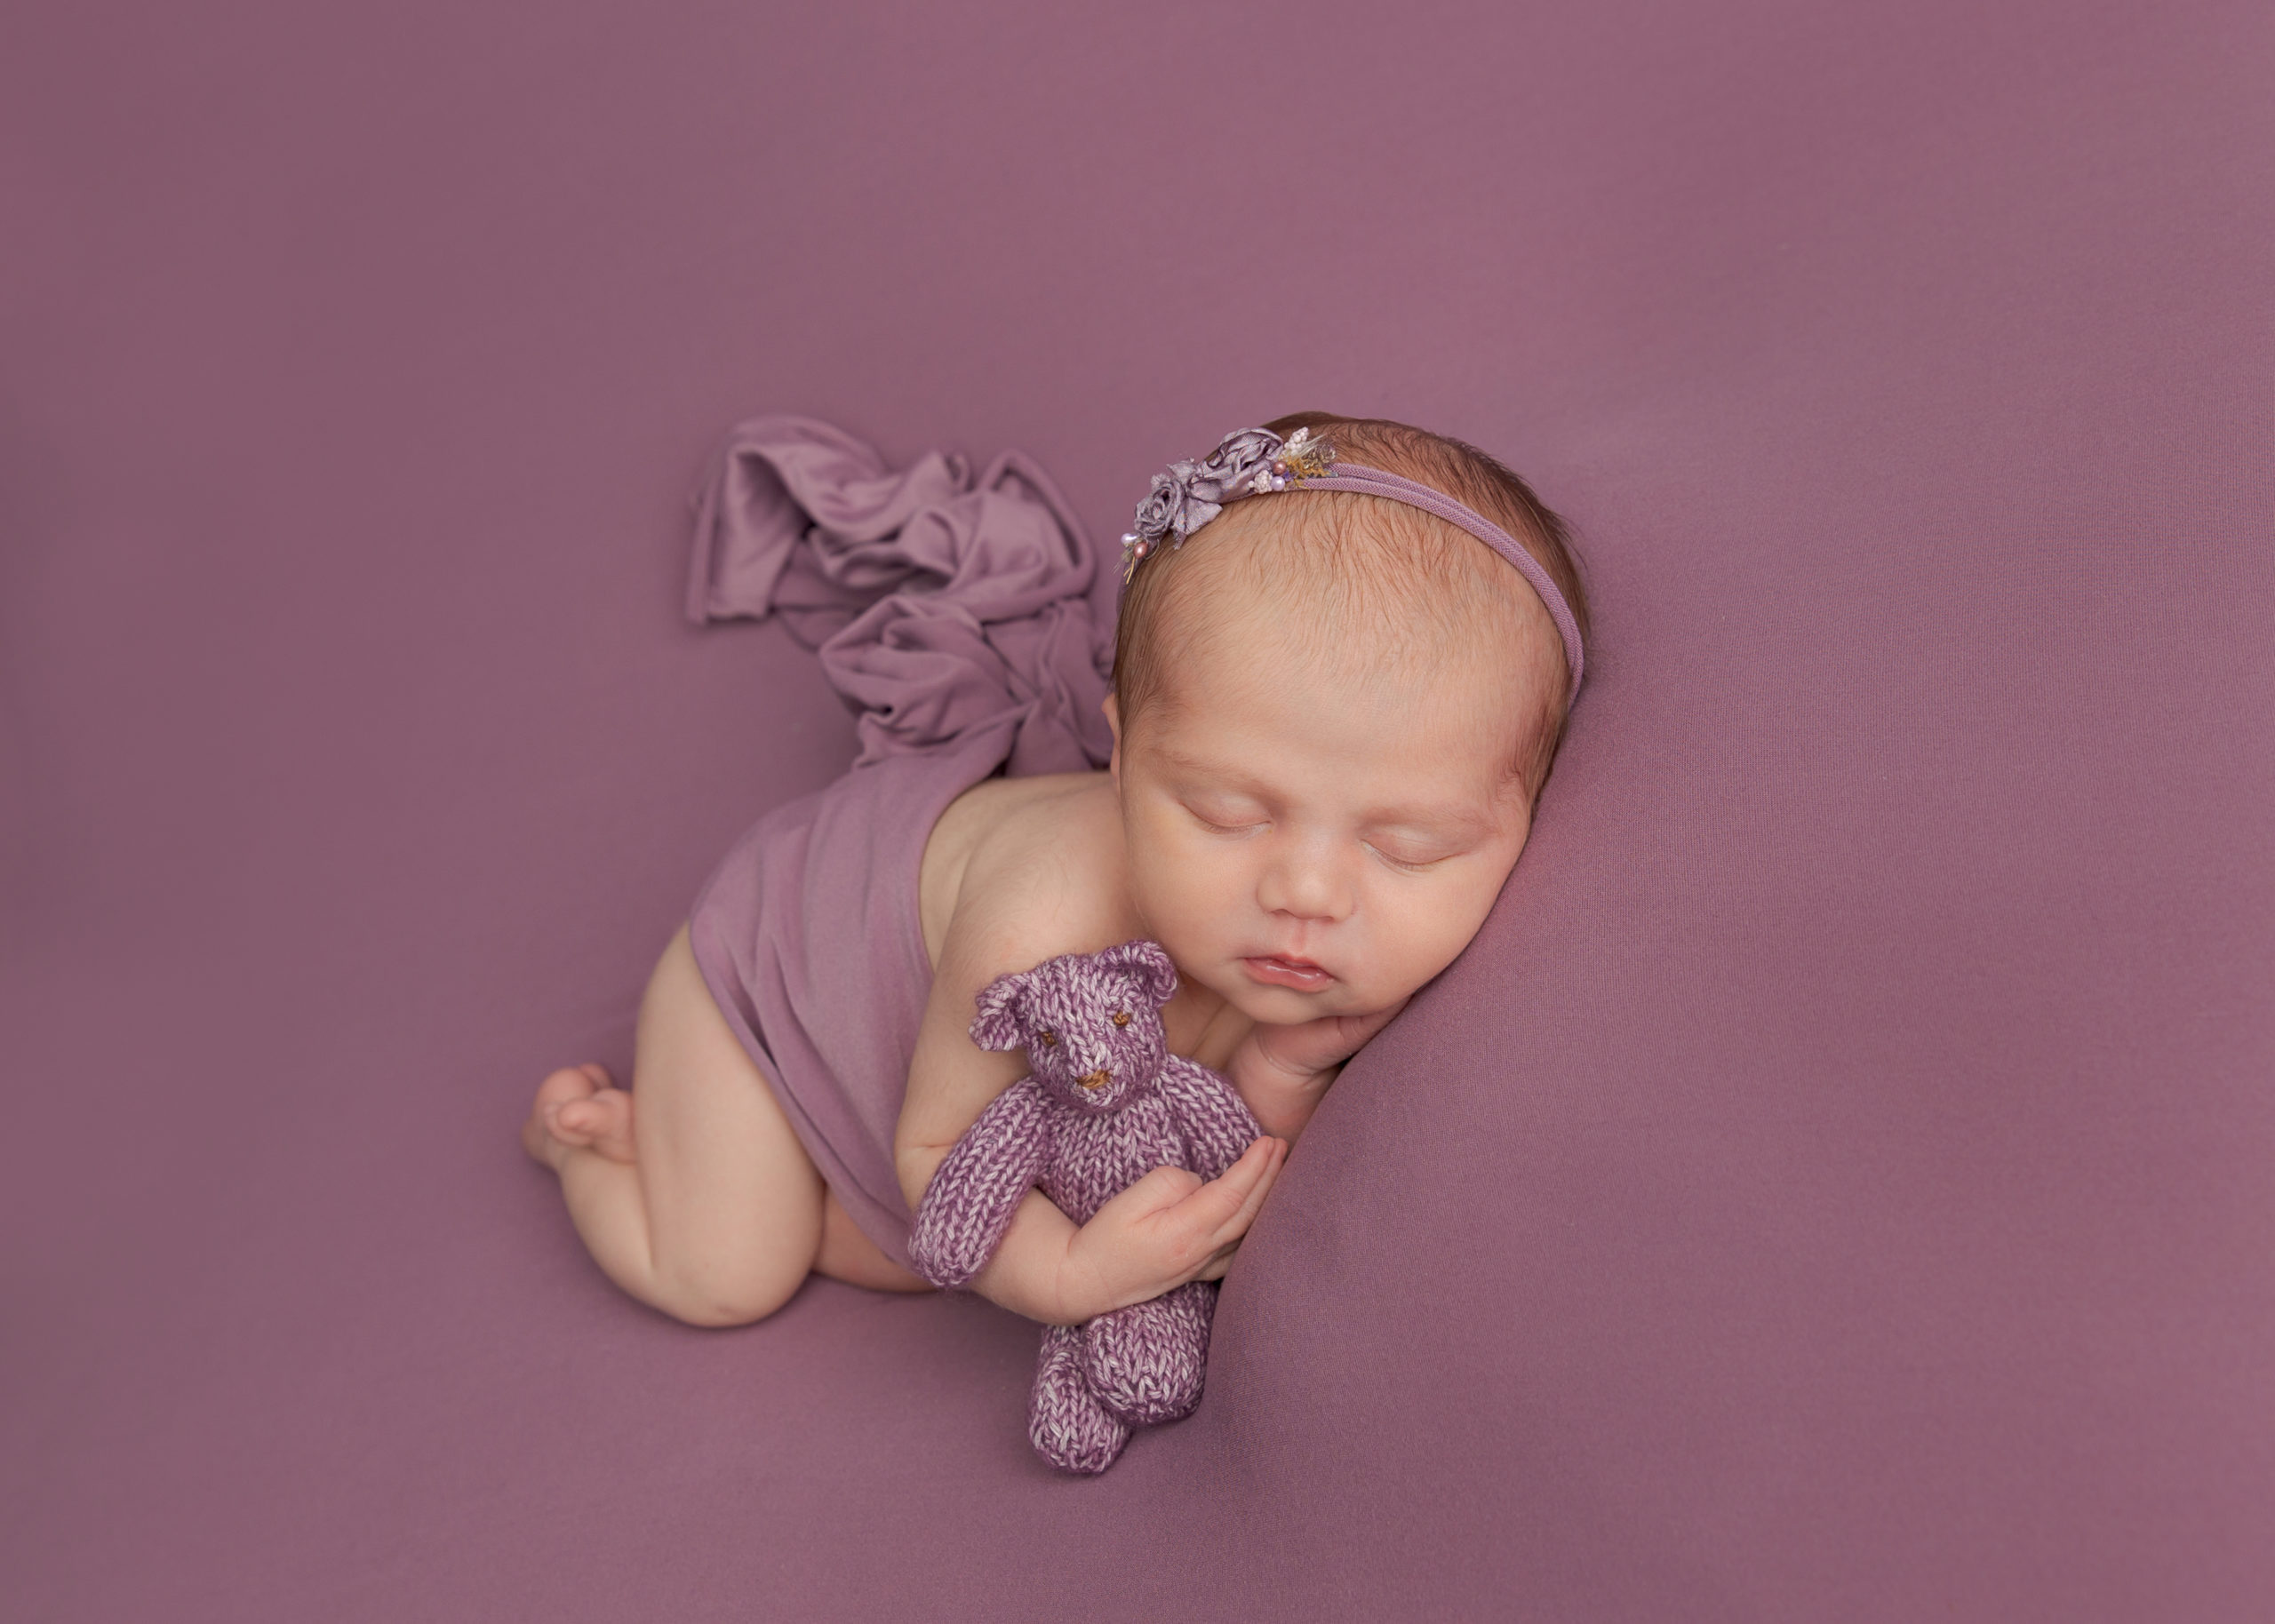 Baby girl dressed wrapped in a lilac cloth cuddling a teddy bear during a photoshoot